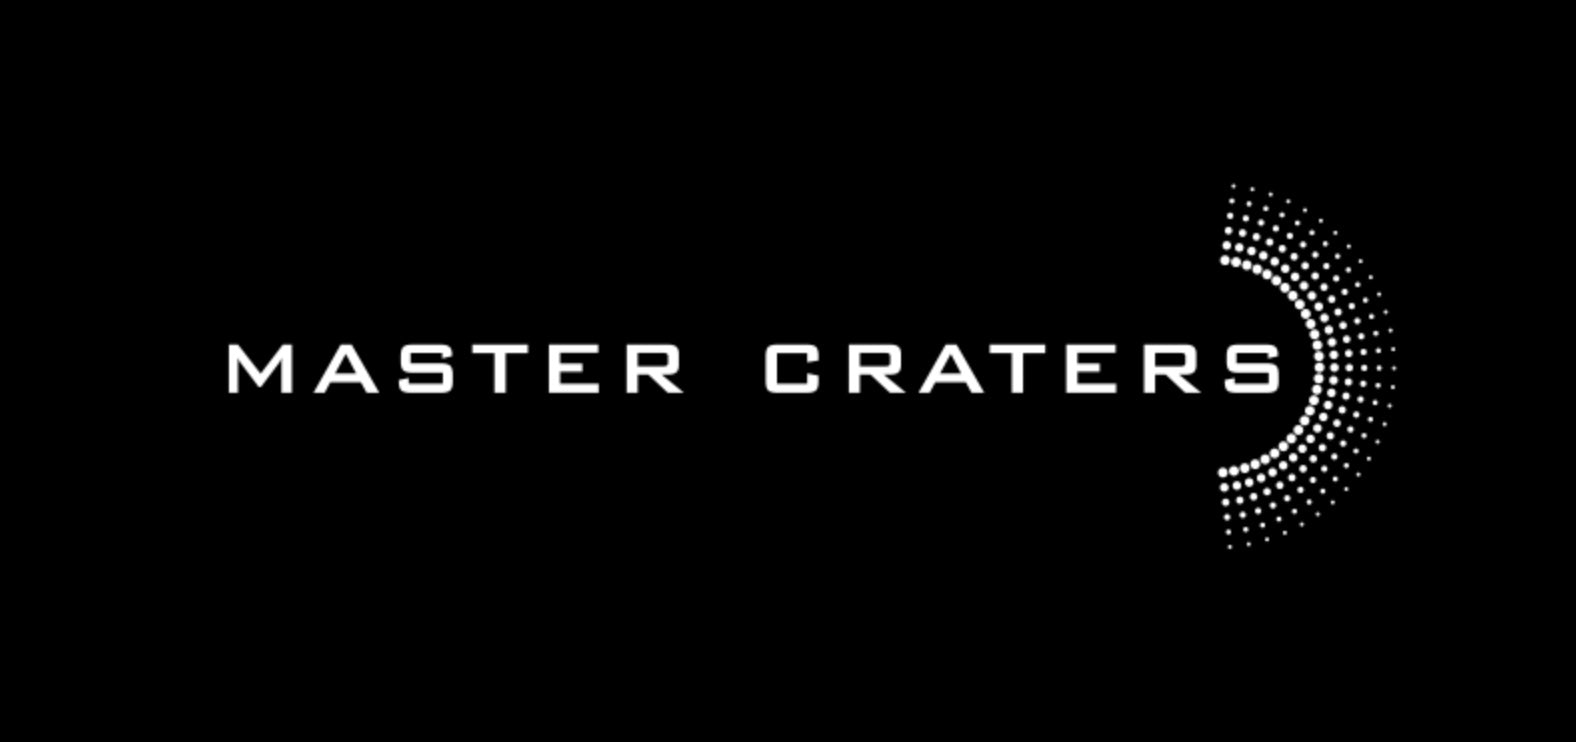 Master Craters